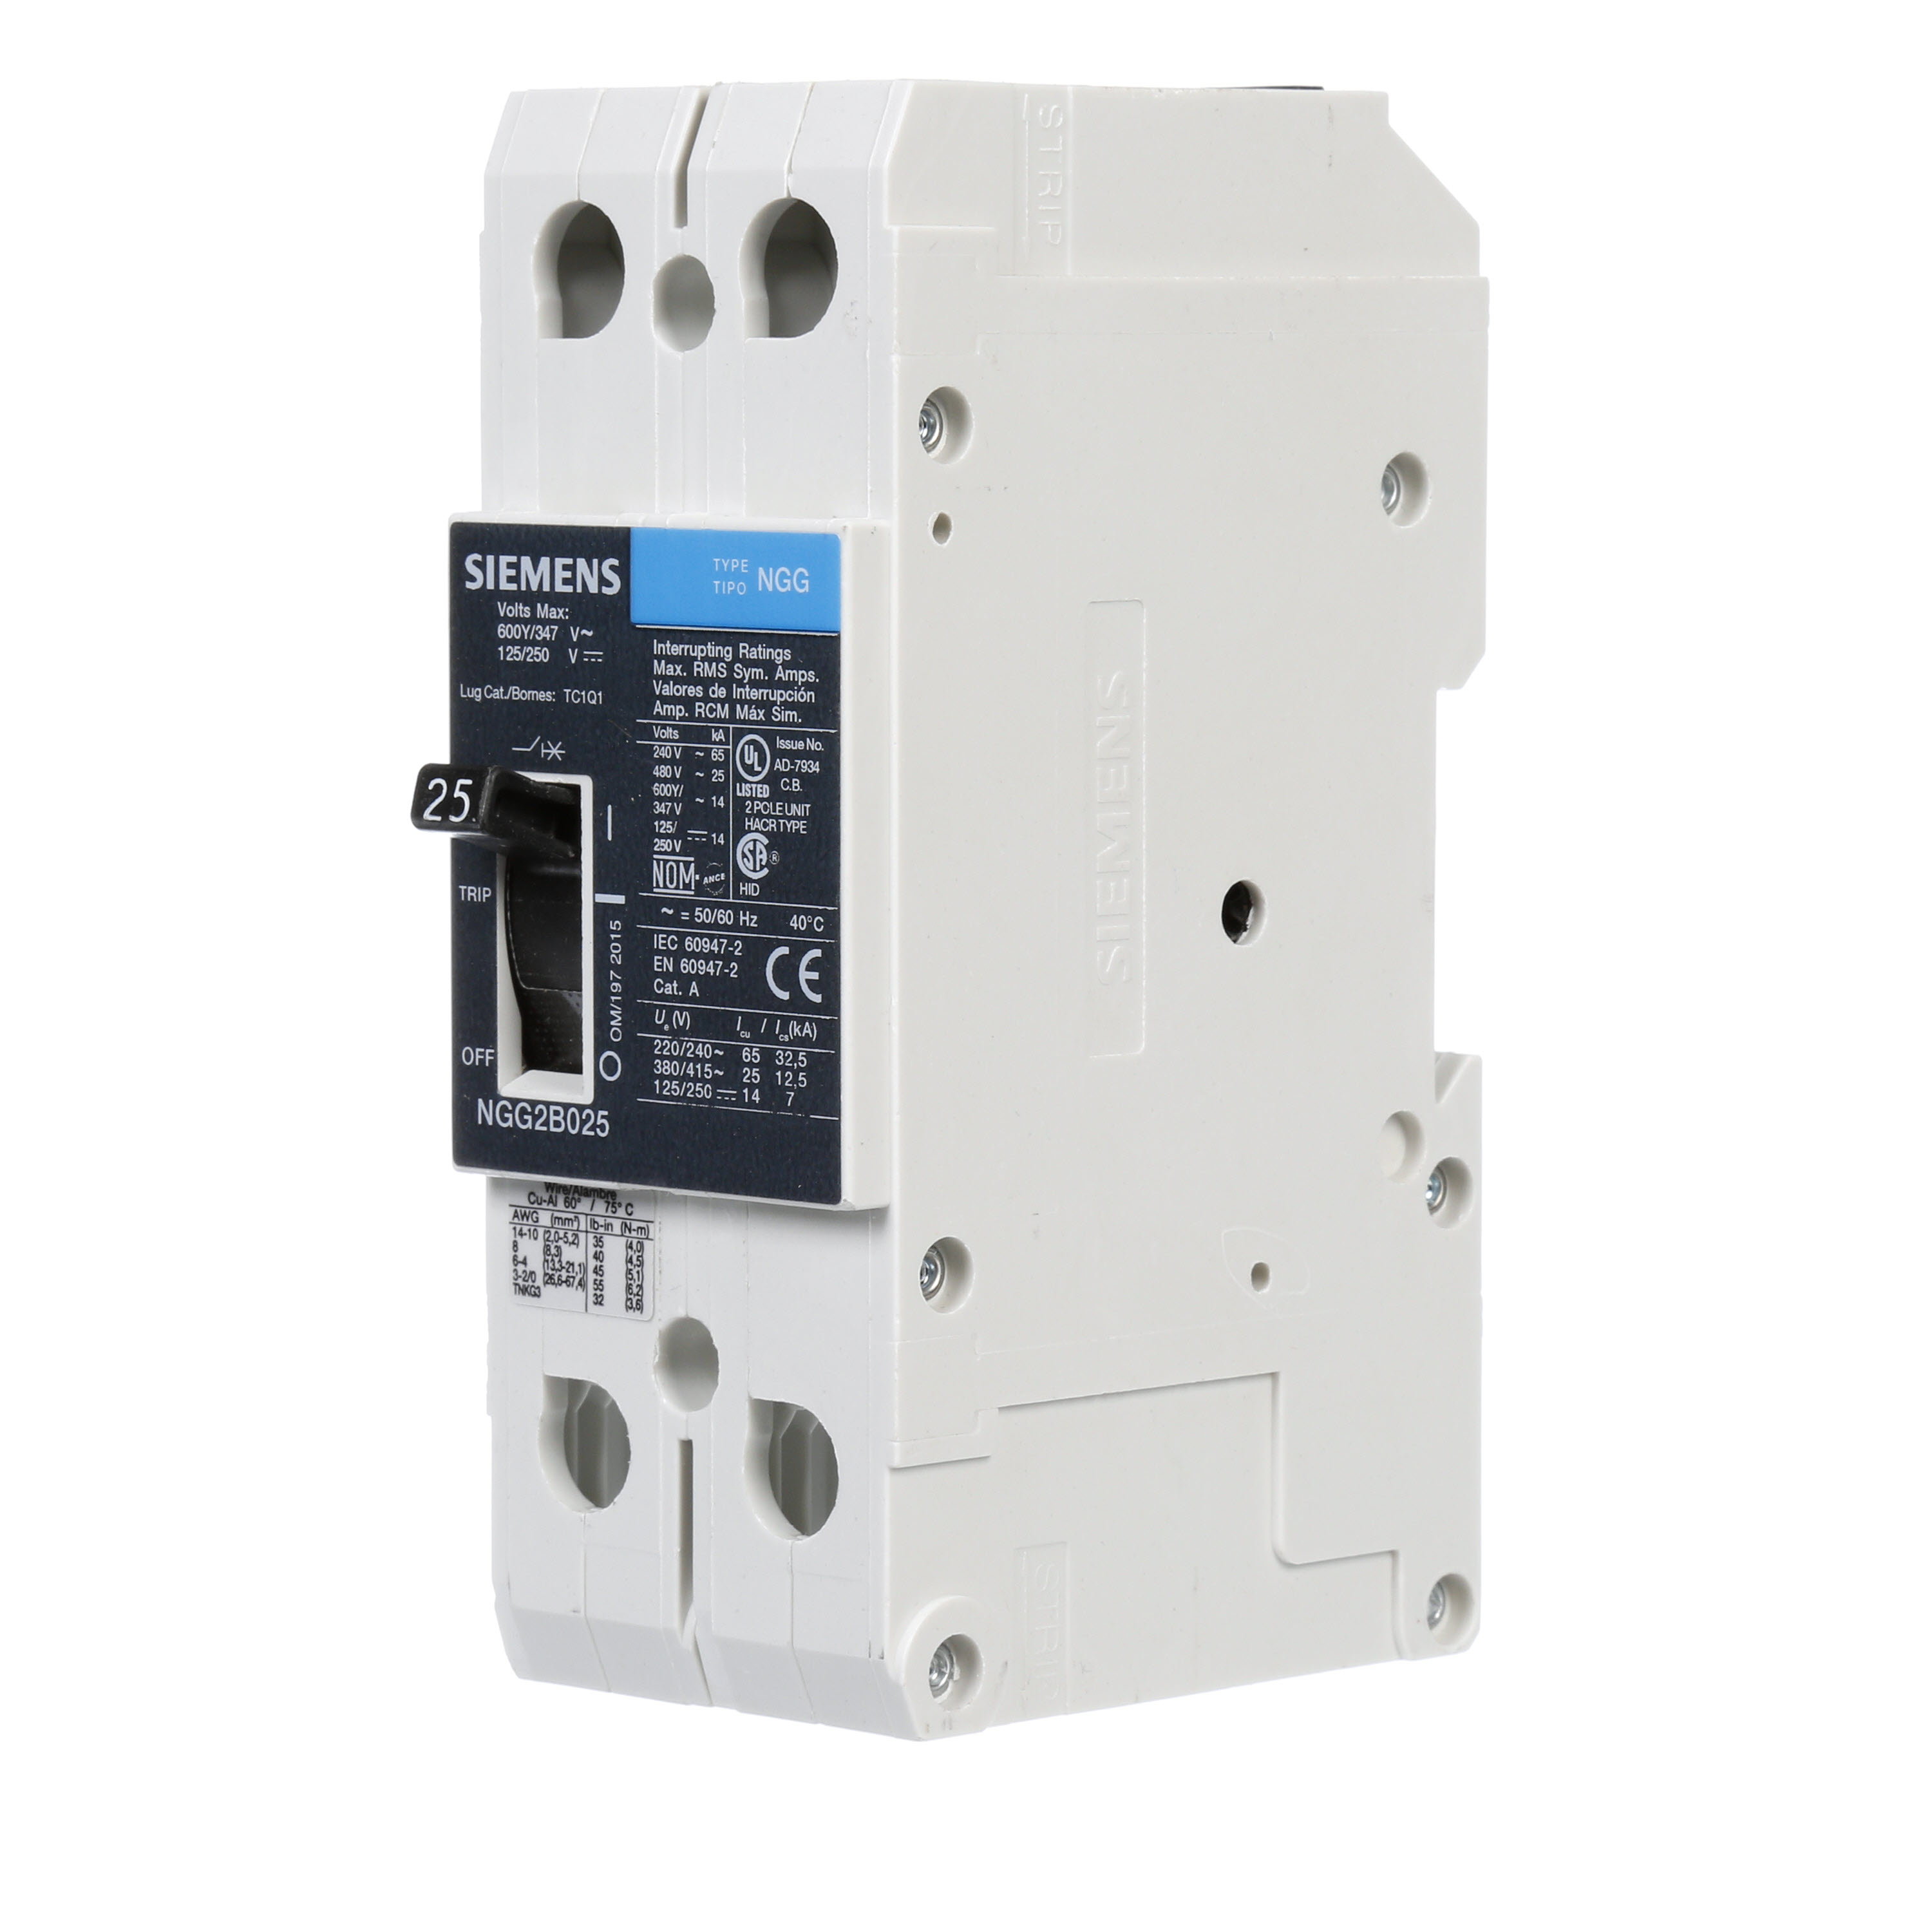 SIEMENS LOW VOLTAGE G FRAME CIRCUIT BREAKER WITH THERMAL - MAGNETIC TRIP. UL LISTED NGG FRAME WITH STANDARD BREAKING CAPACITY. 25A 2-POLE (14KAIC AT 600Y/347V)(25KAIC AT 480V). SPECIAL FEATURES MOUNTS ON DIN RAIL / SCREW, LINE AND LOAD SIDE LUGS (TC1Q1) WIRE RANGE 14 - 10 AWS (CU/AL). DIMENSIONS (W x H x D) IN 2 x 5.4 x 2.8.